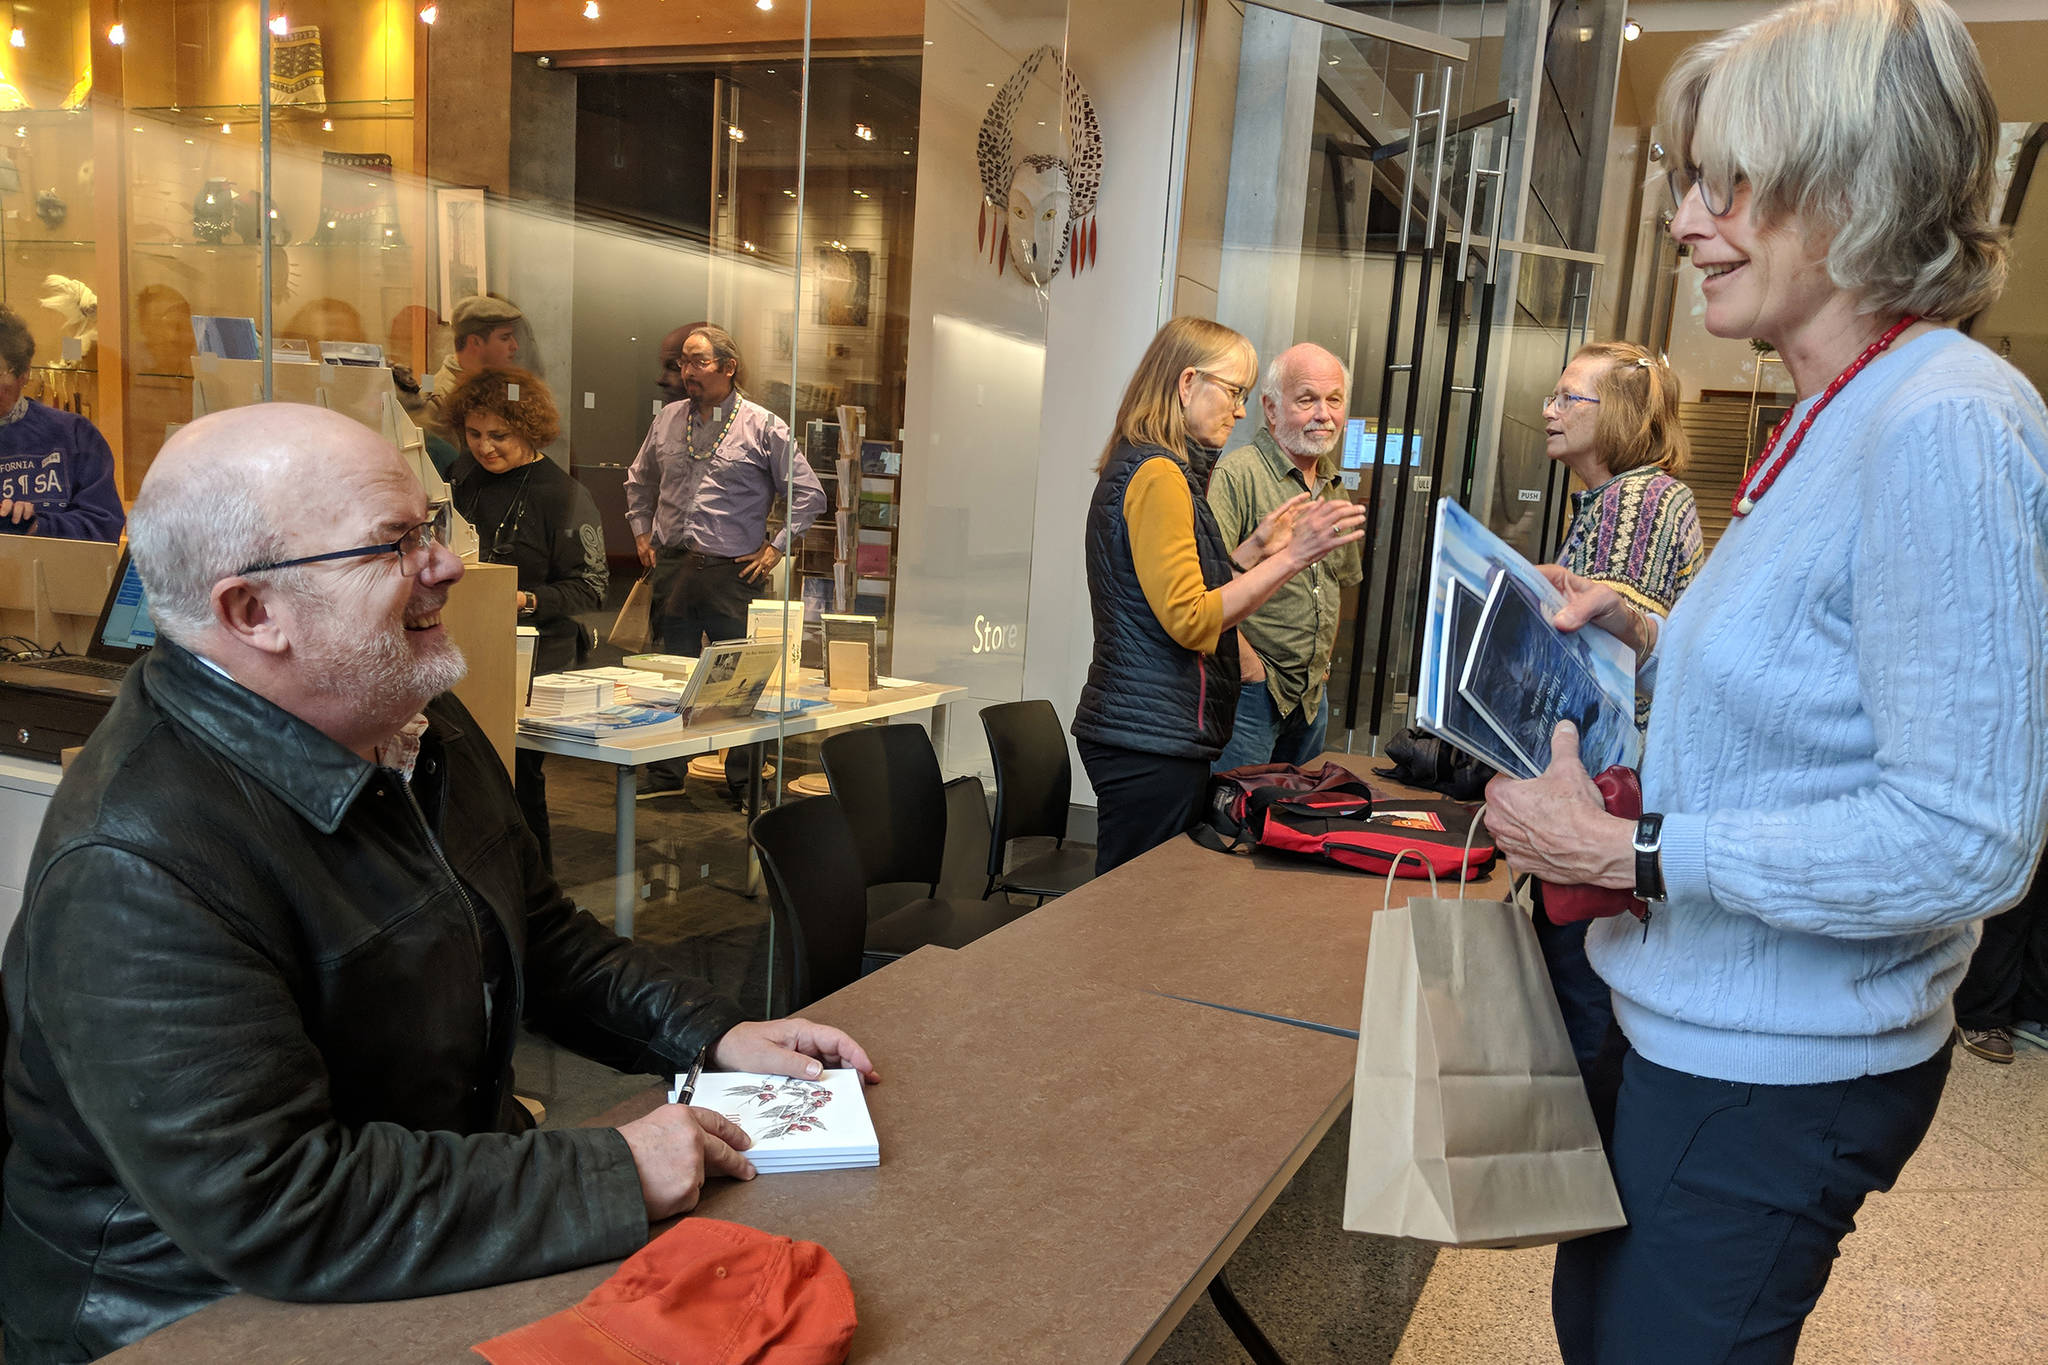 Author John Straley prepares to sign a book for author Heather Lende after the Alaska Literary Festival at the Father Andrew P. Kashevaroff building. They were both speakers at the event. (Ben Hohenstatt | Capital City Weekly)